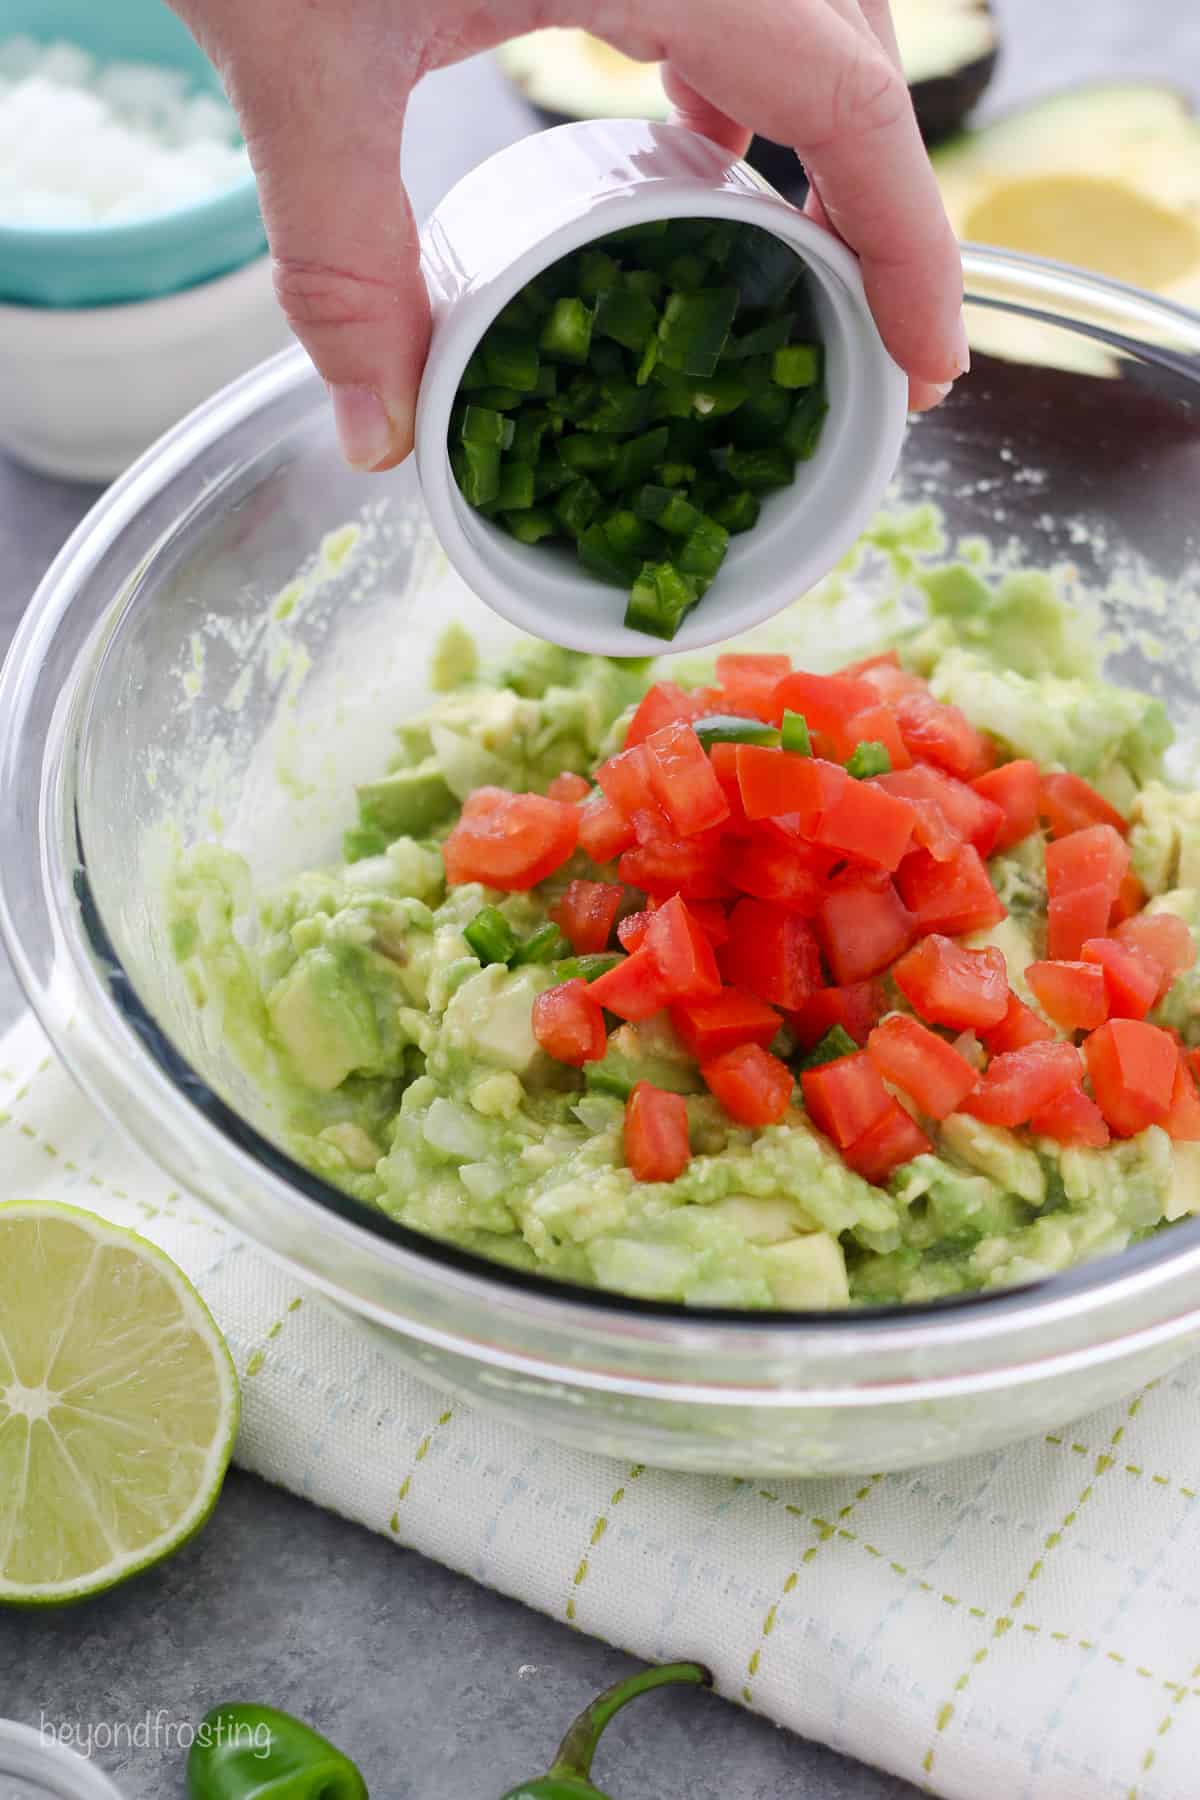 A hand dumping a small dish of diced jalapenos into a bowl with mashed avocado and diced tomatoes.